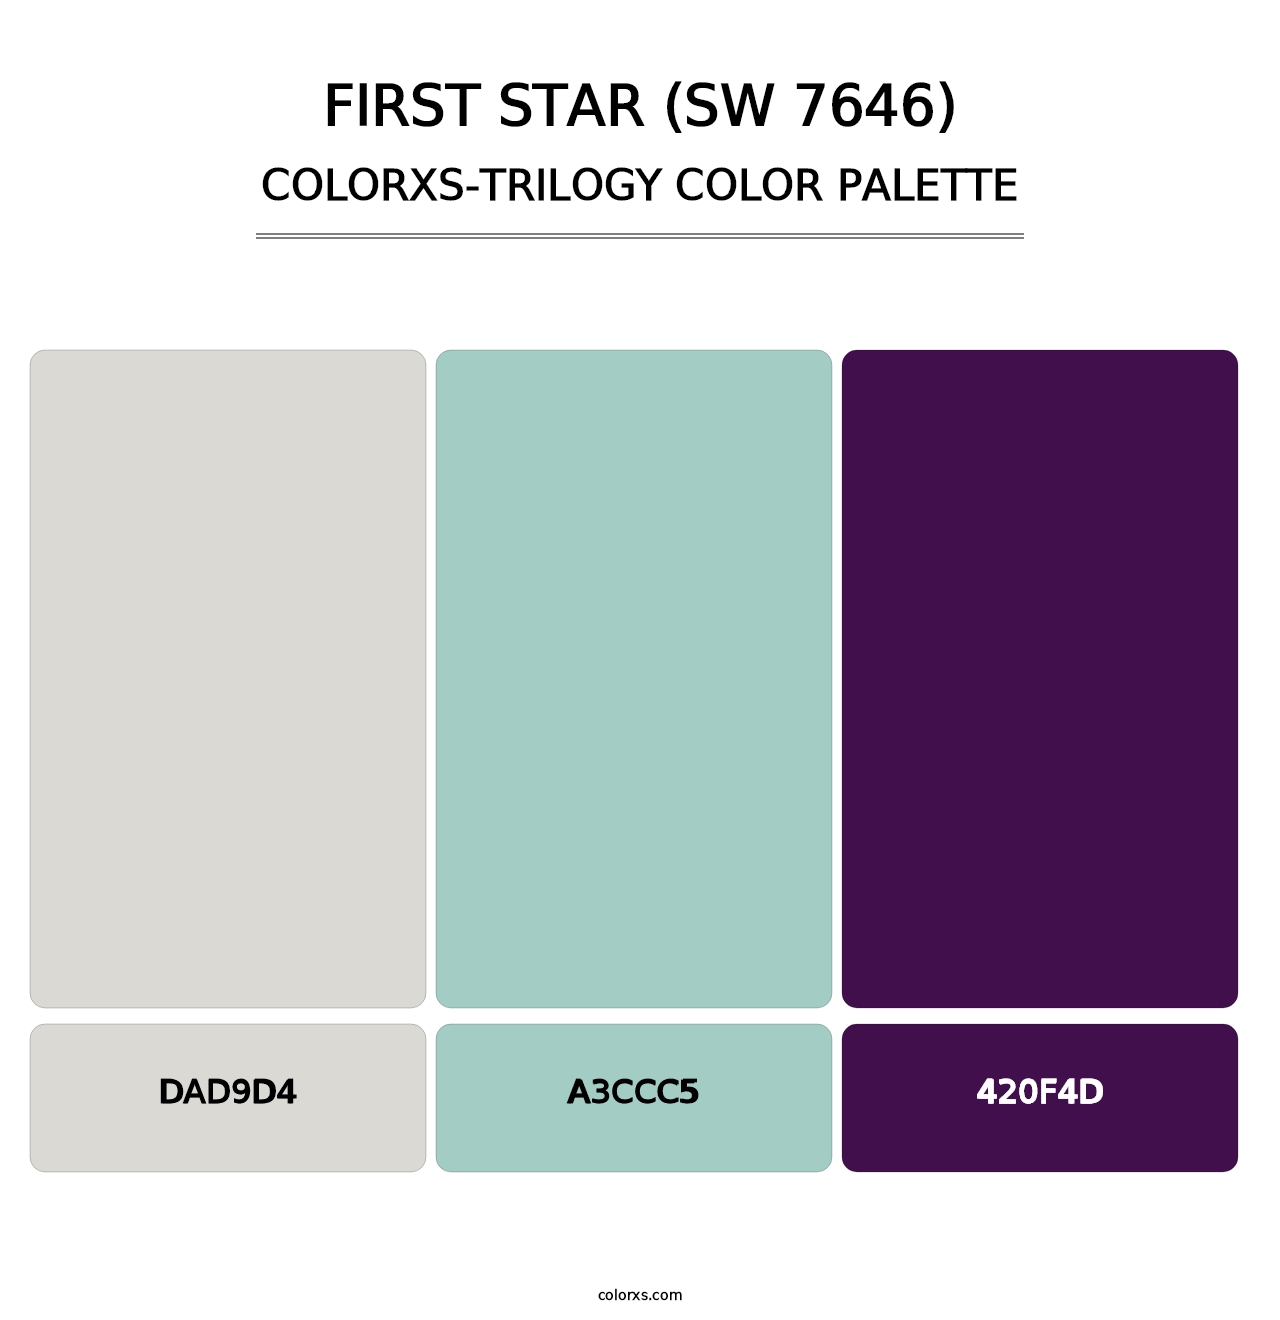 First Star (SW 7646) - Colorxs Trilogy Palette